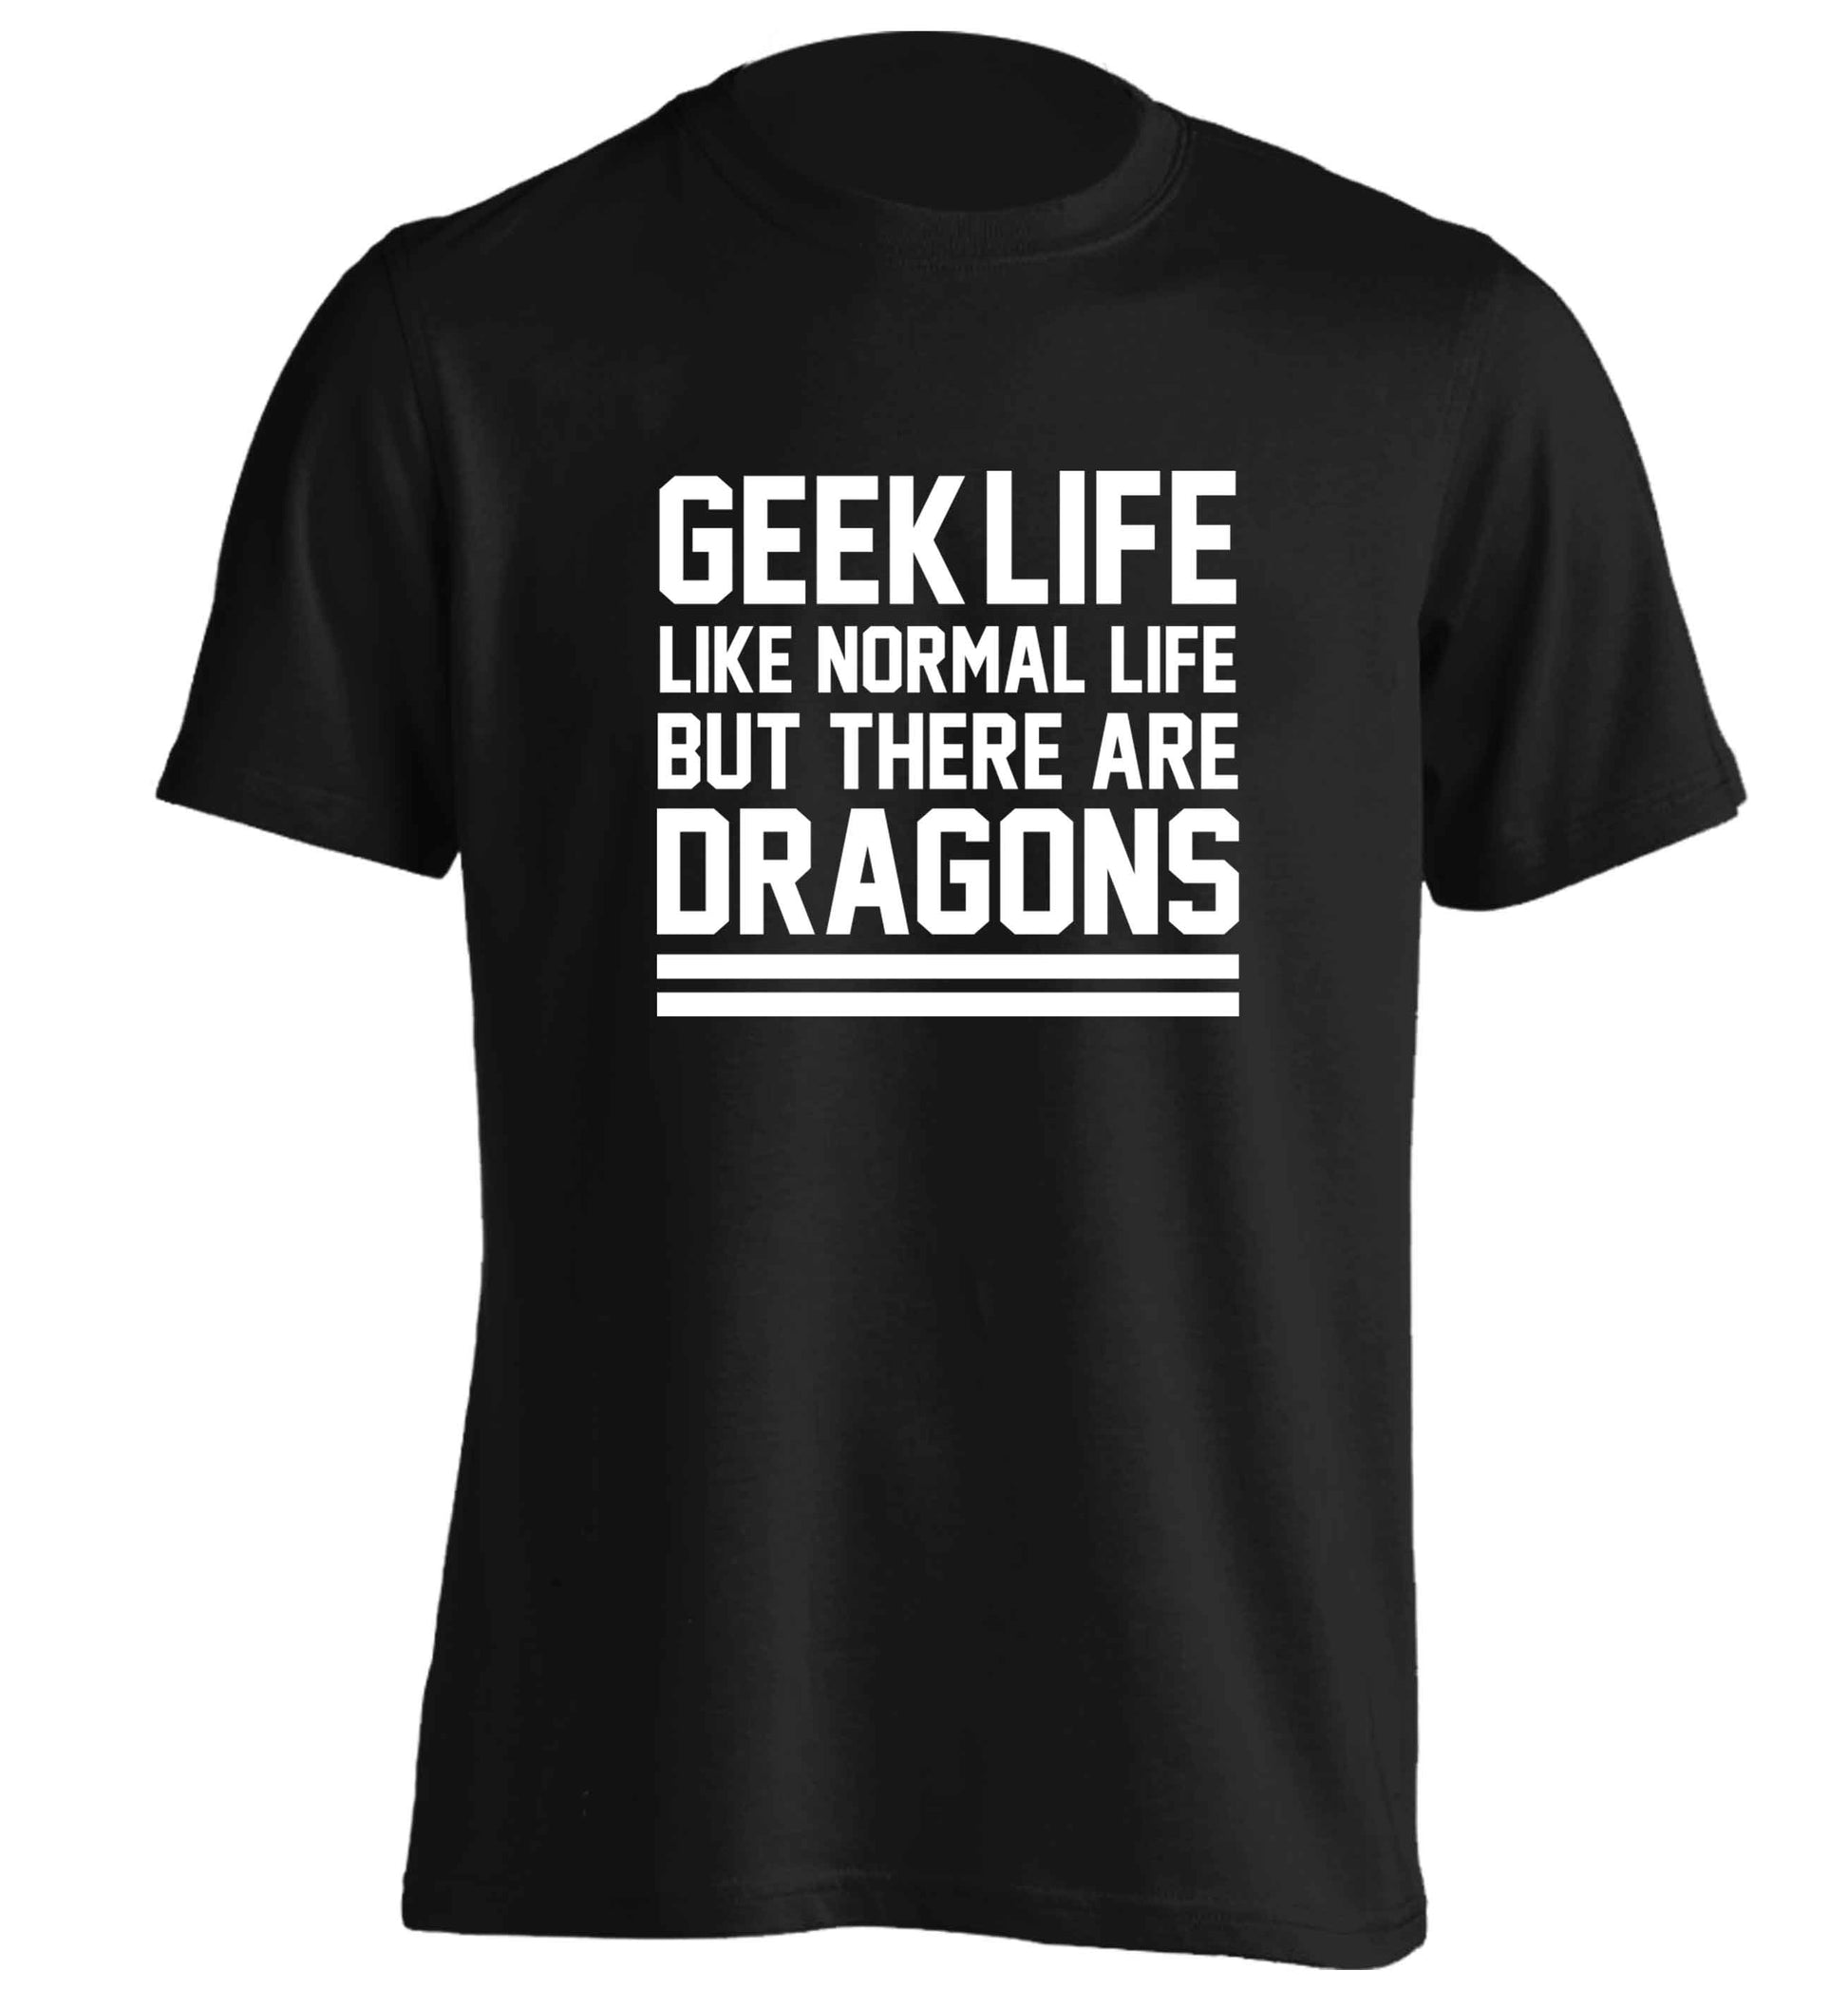 Geek life like normal life but there are dragons adults unisex black Tshirt 2XL